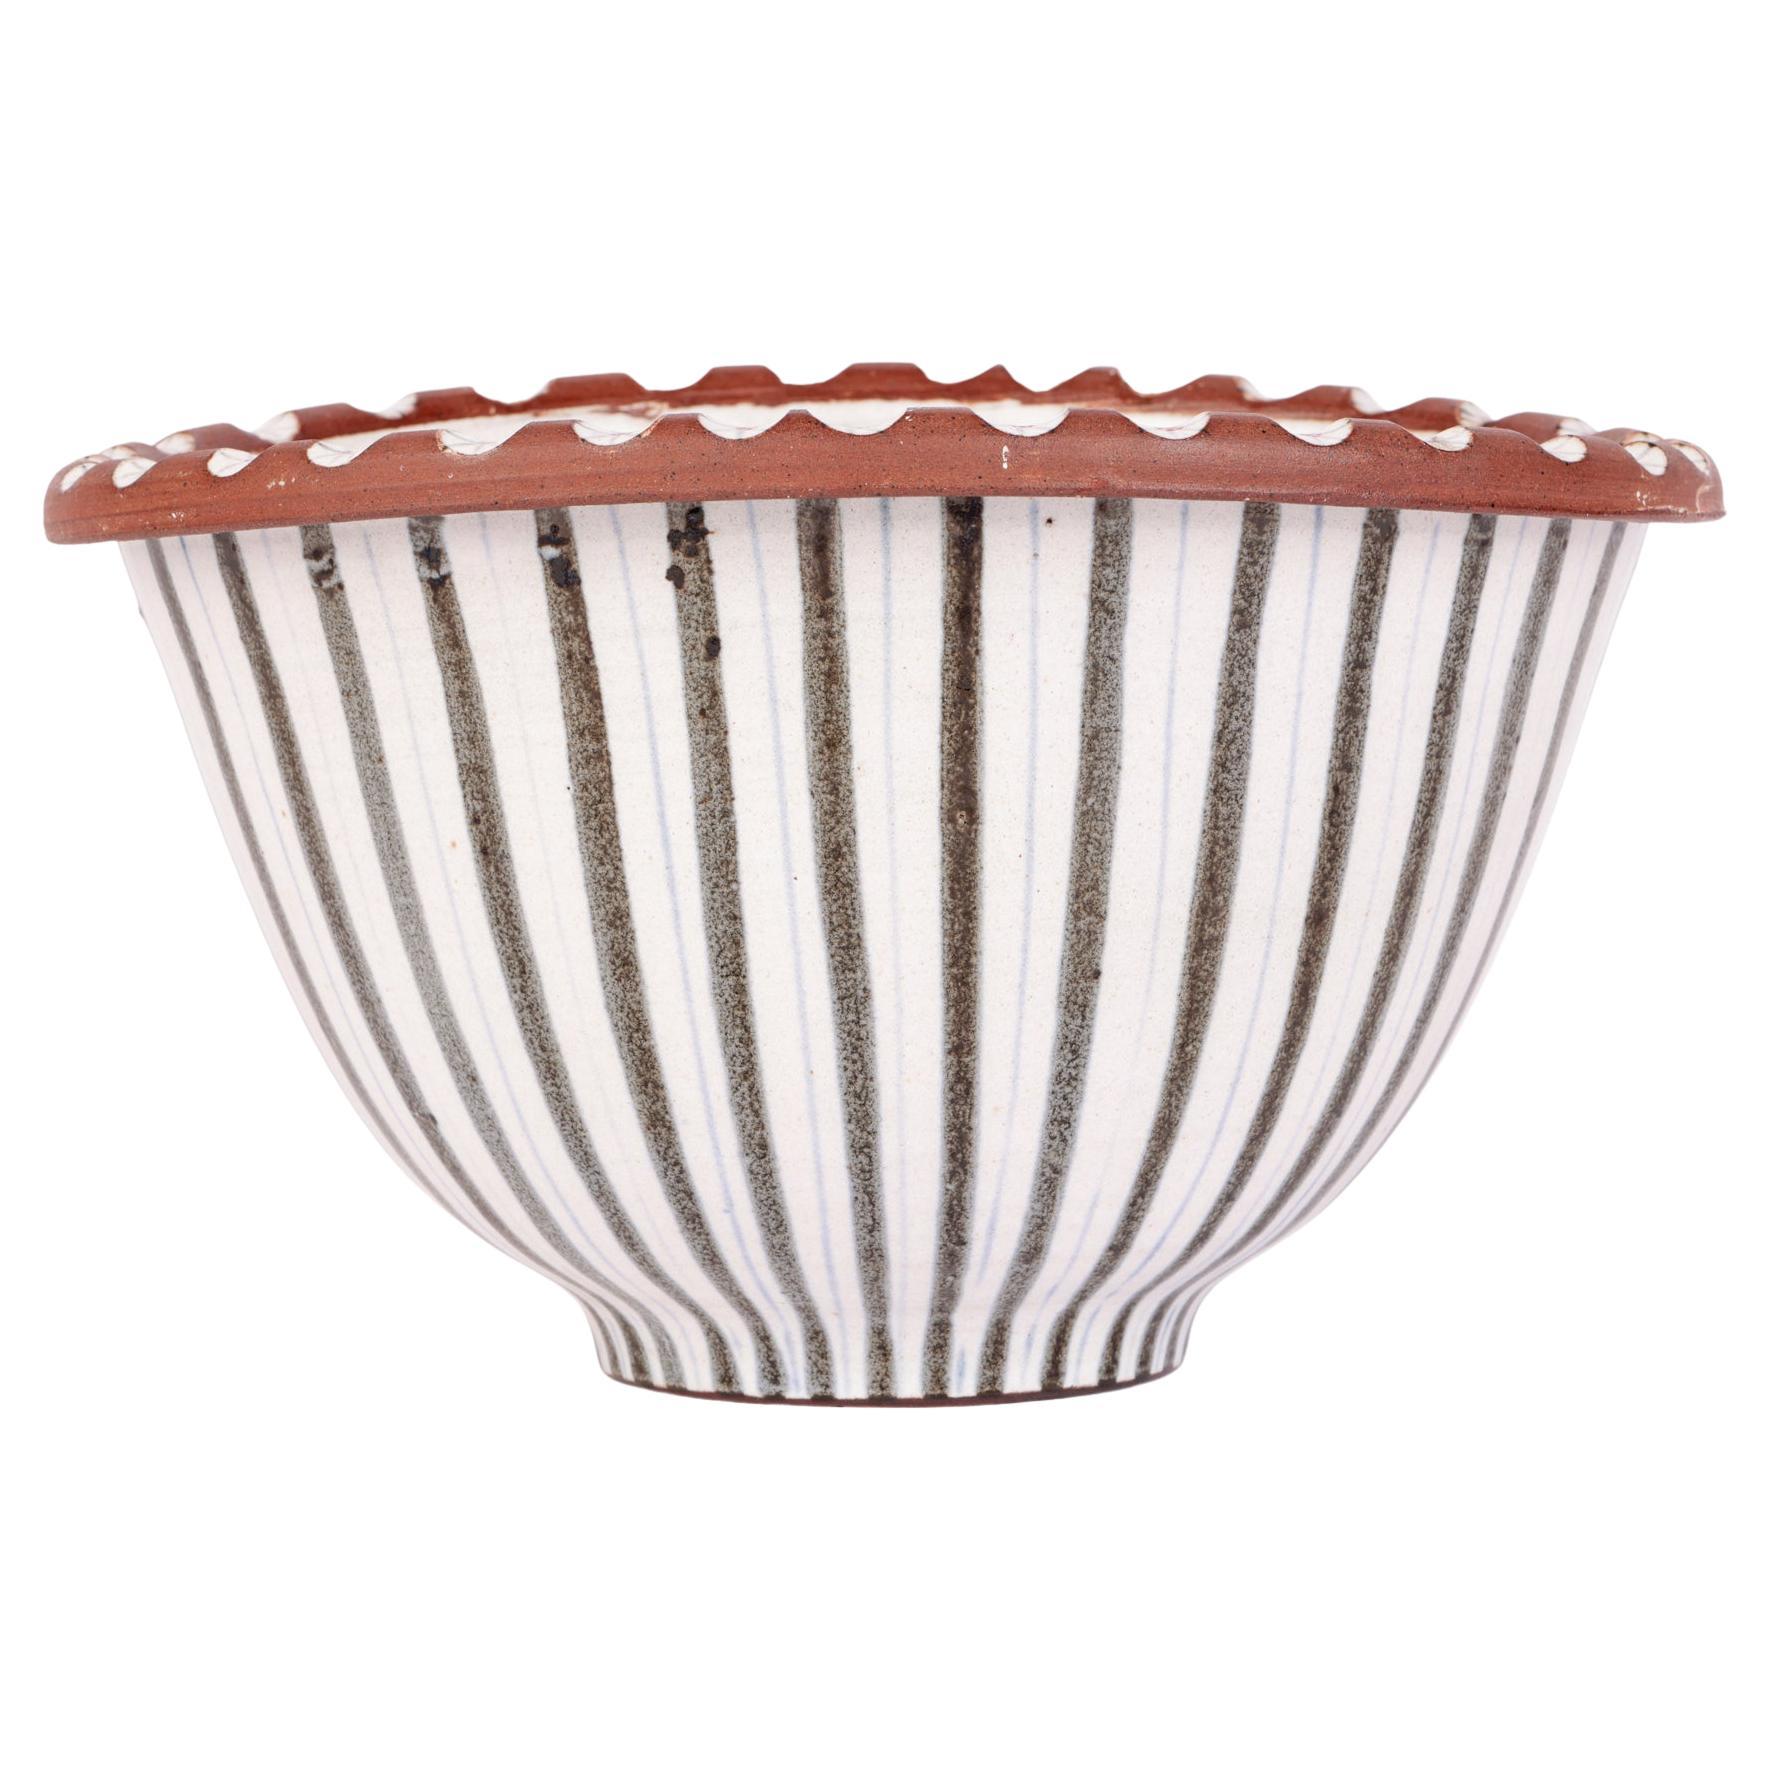 A stylish and large mid-century Rye studio pottery bowl decorated with linear patterning by Walter and Jack Cole. The bowl is of pinched oval shape standing on a narrow round foot with a fold over top edge. The bowl is finely potted and the body is